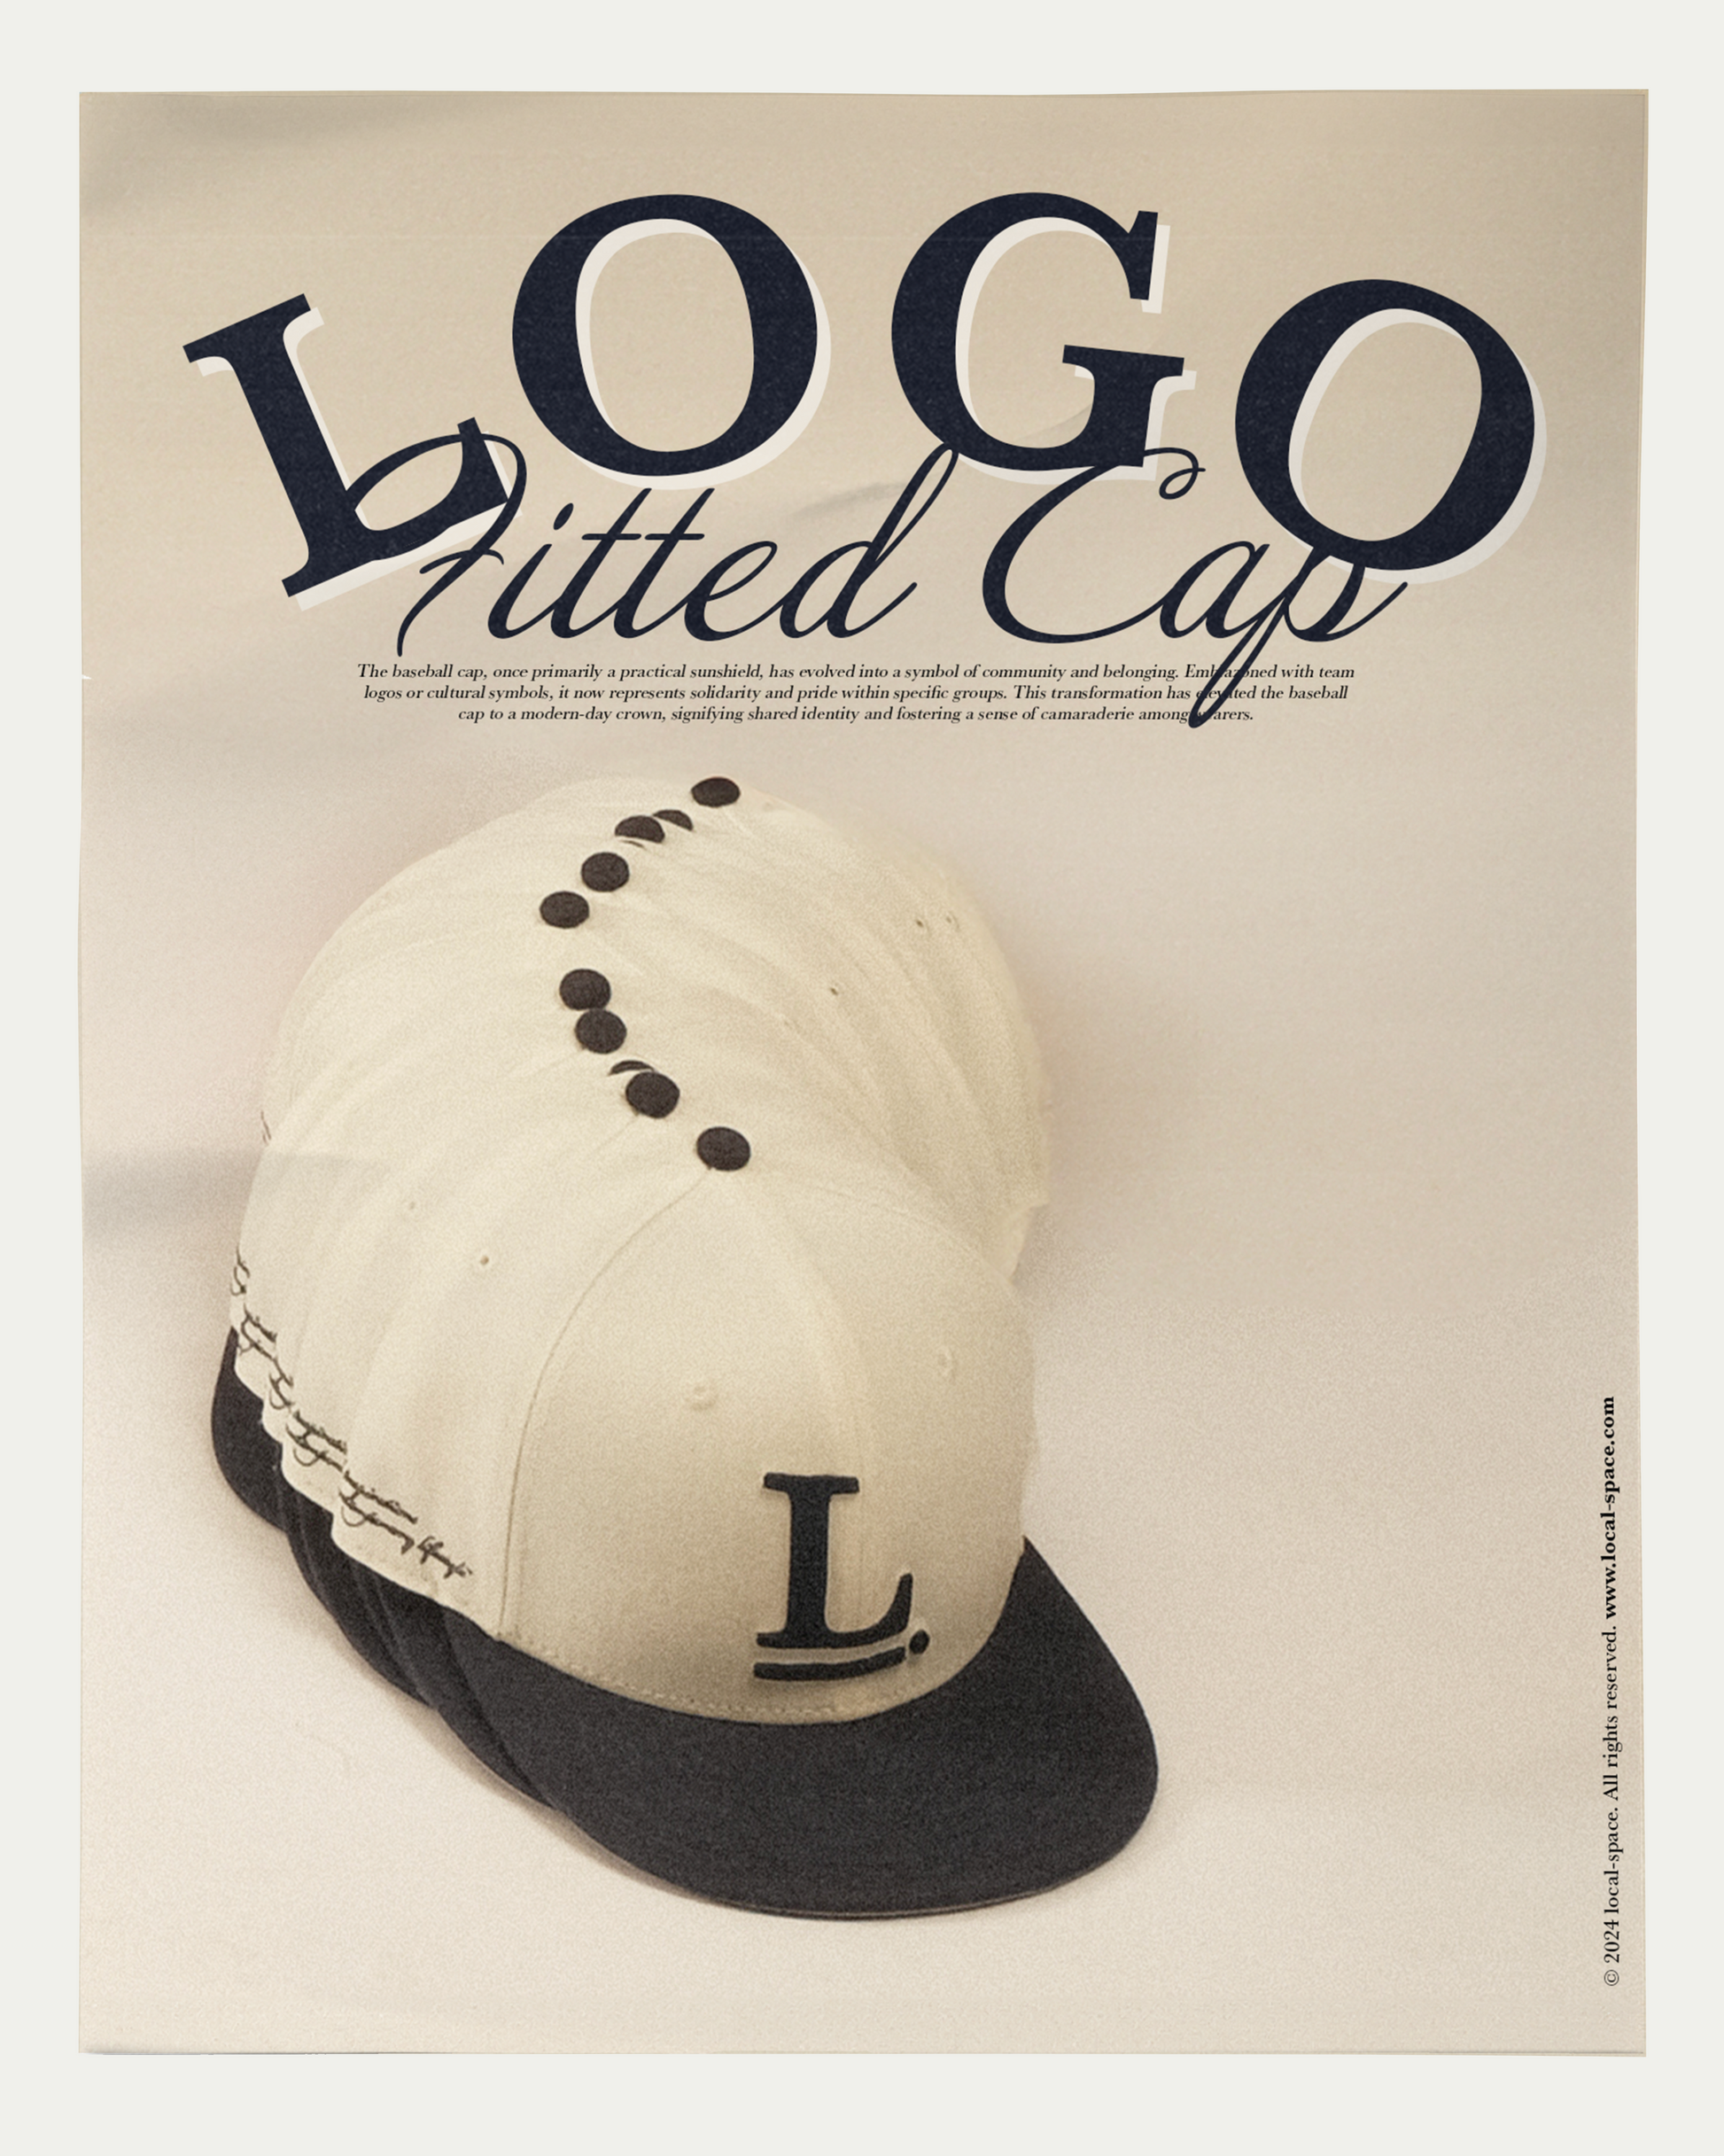 White and Navy fitted baseball cap with Local Space emblem in 3D chain embroidery on the front, 'ISSUE 0001' on the left, and LOCAL logo on the rear, structured crown and flat brim with a grey underside.